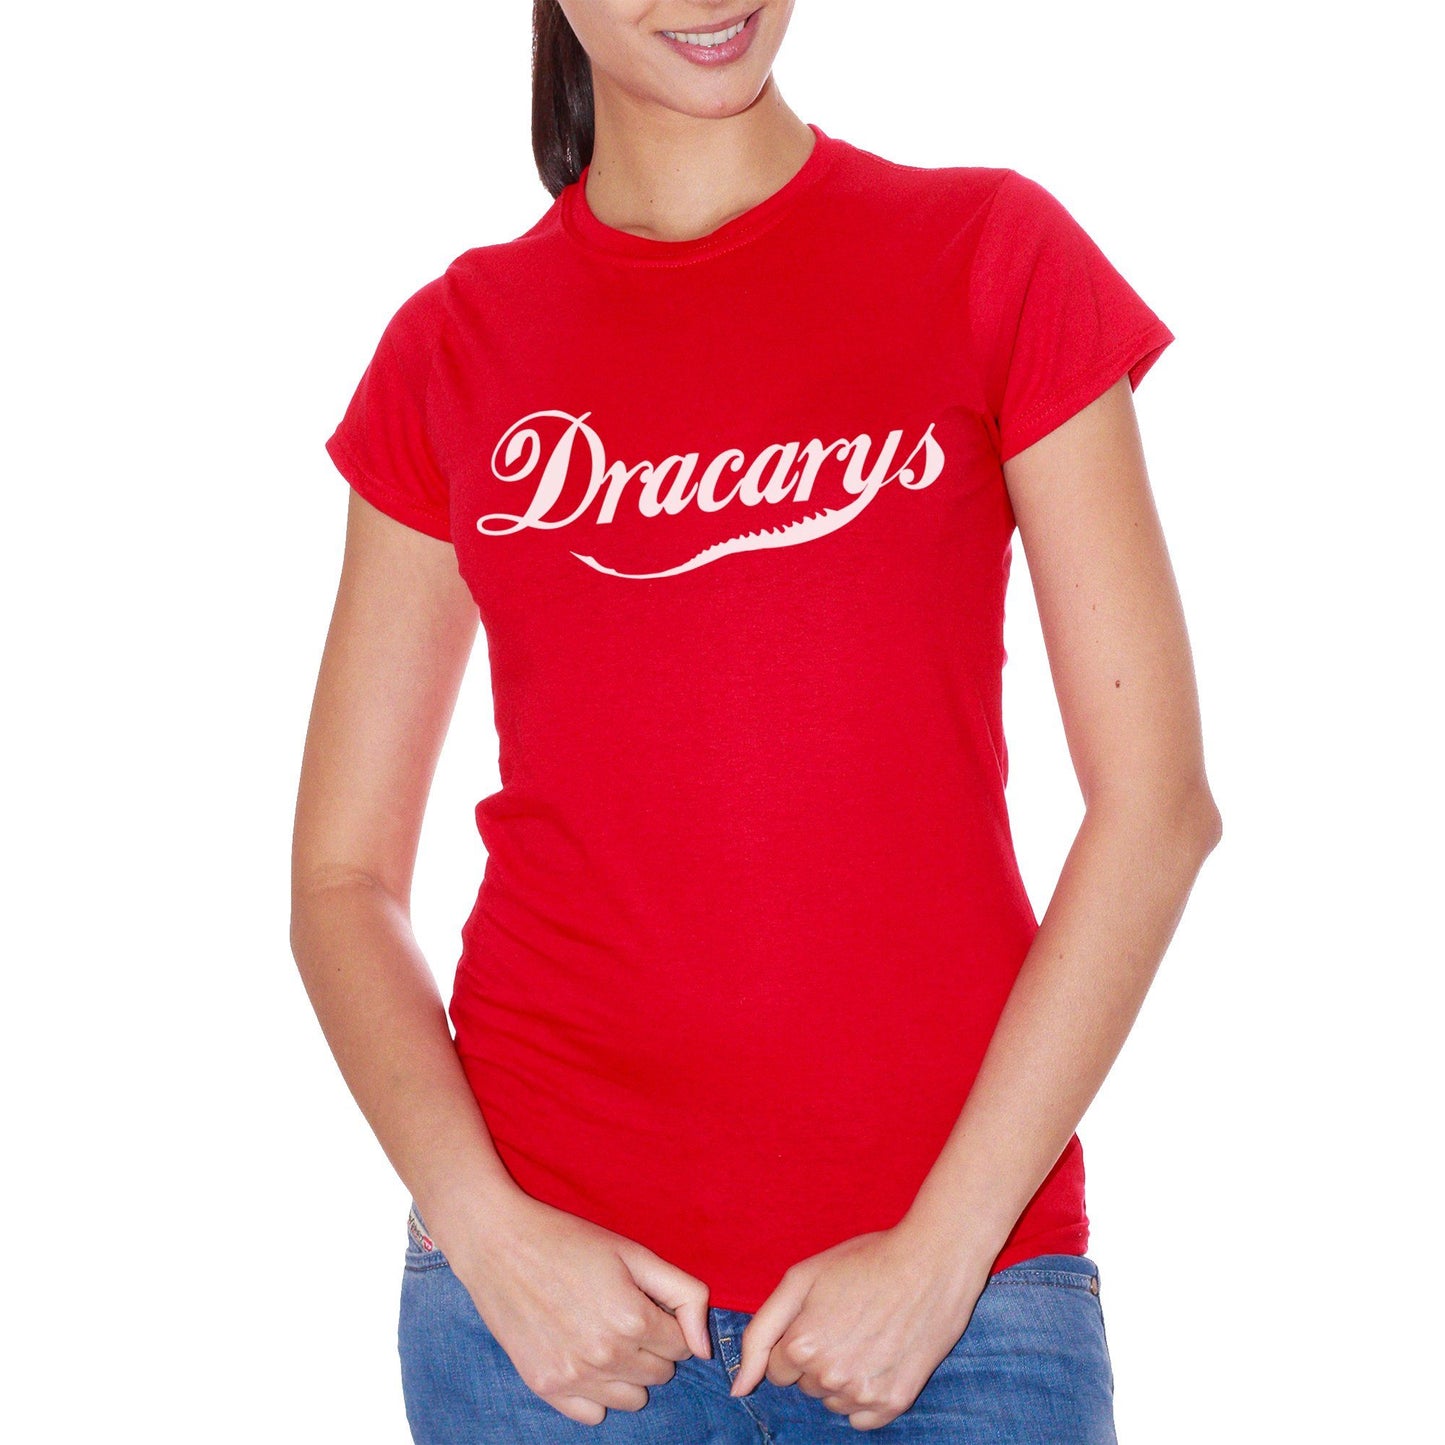 Red T-Shirt Dracarys Khaleesy Mother Of Dragons Game Of Thrones Got - FILM CucShop